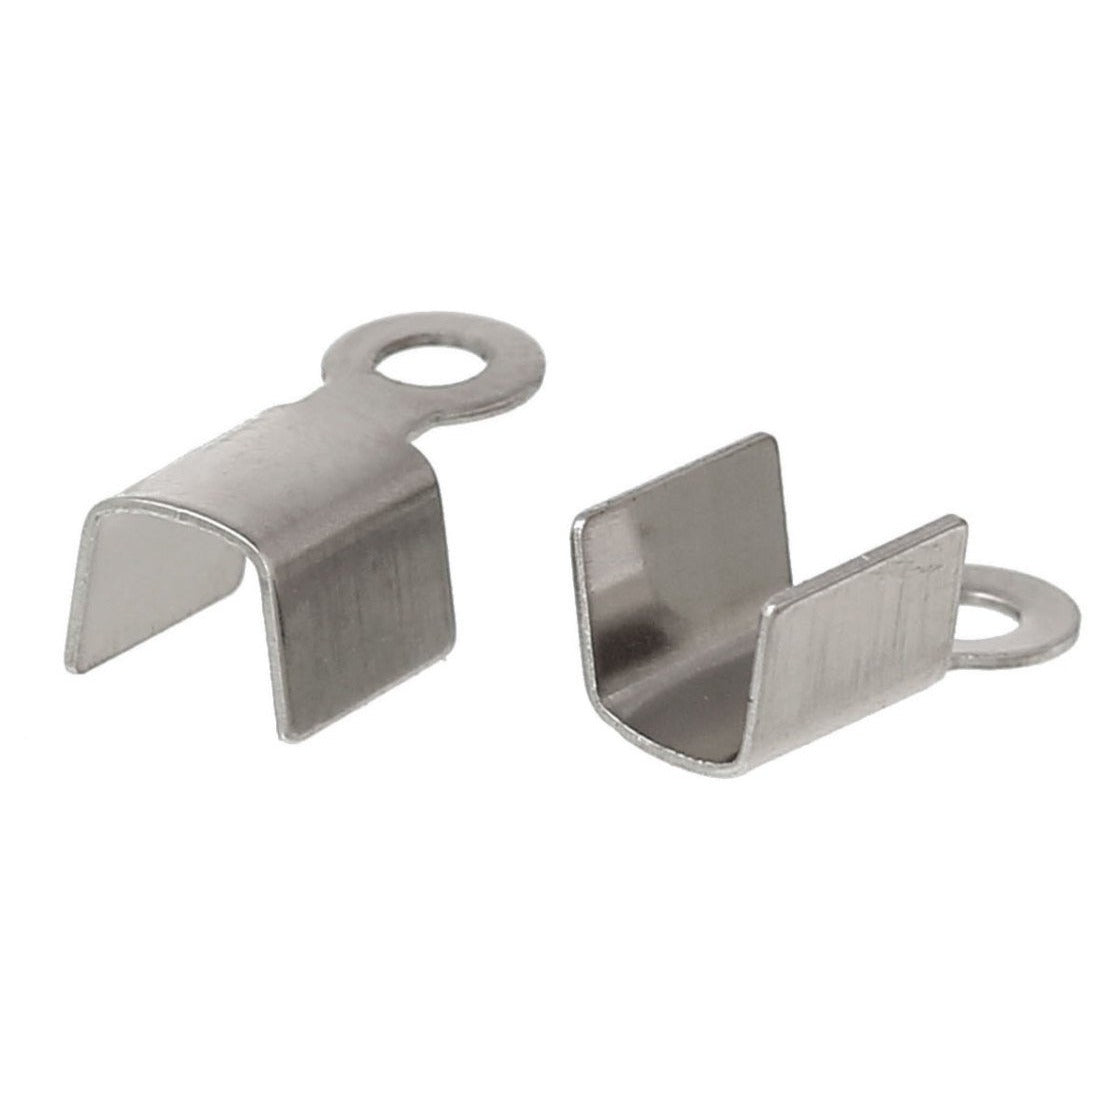 100 pcs Fold Cord Tips, Clasps, Ribbon Crimp End Caps - Fits 3.5mm - 304 Stainless Steel Cord Ends